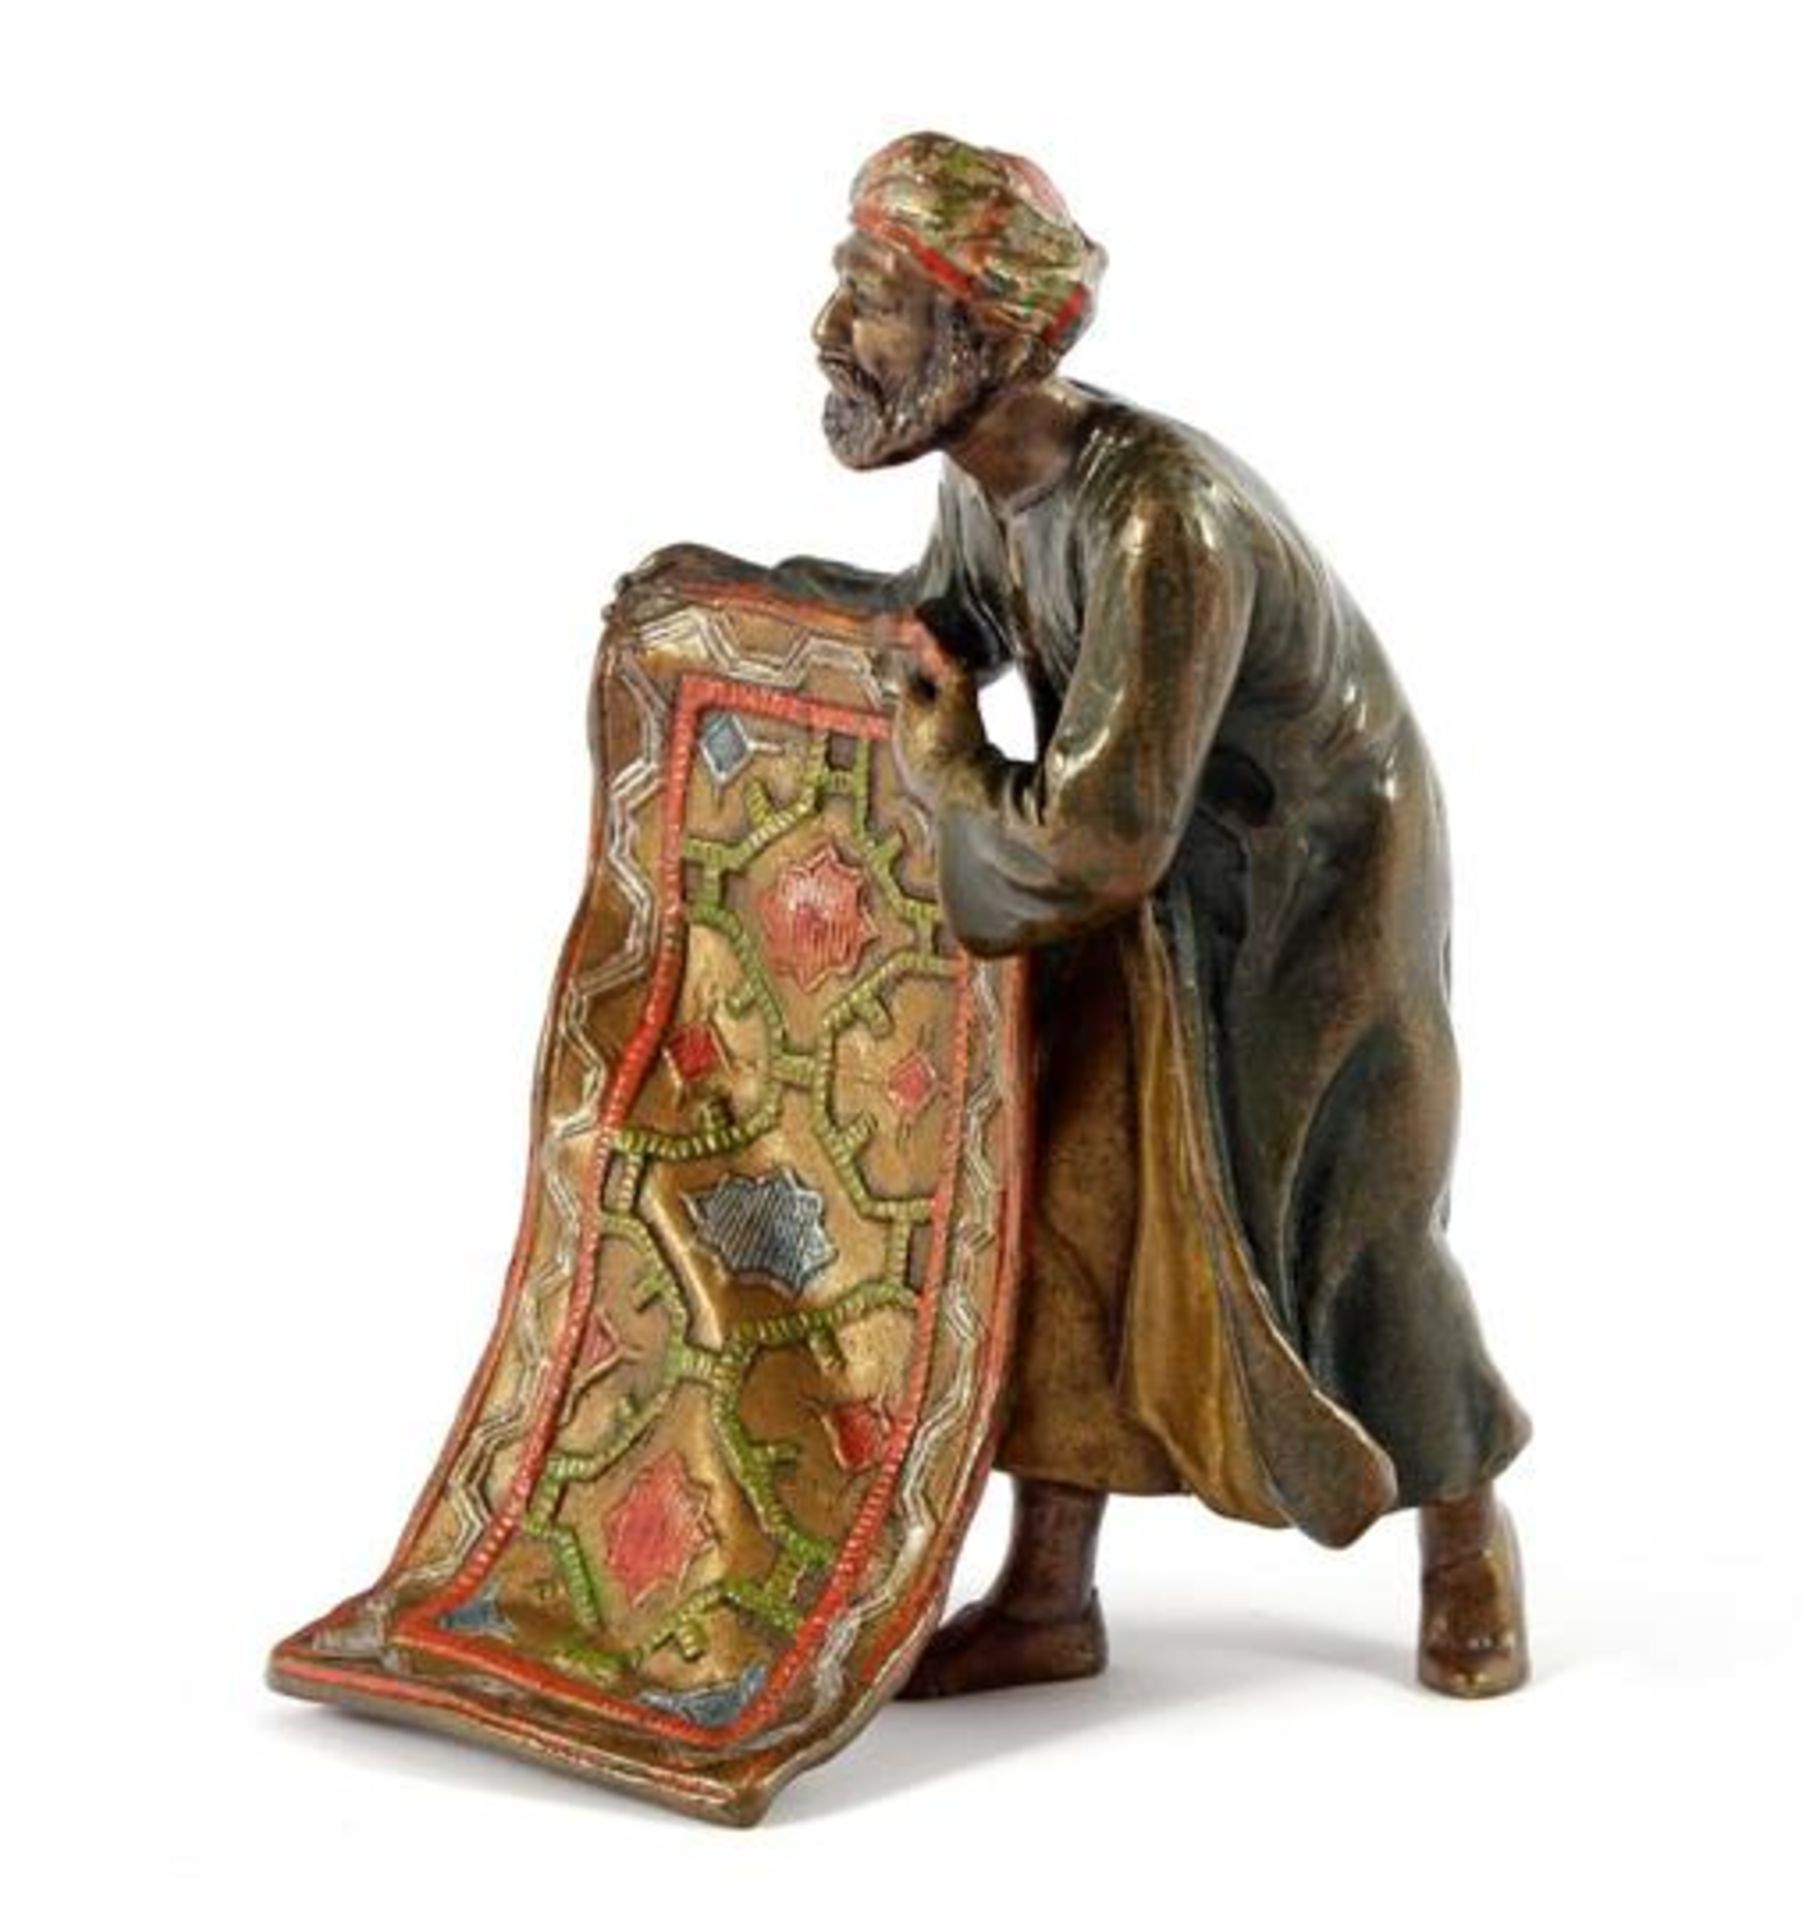 Viennese bronze statuette of an Arab with carpet, cold polychrome painted, with vague stamp of Franz